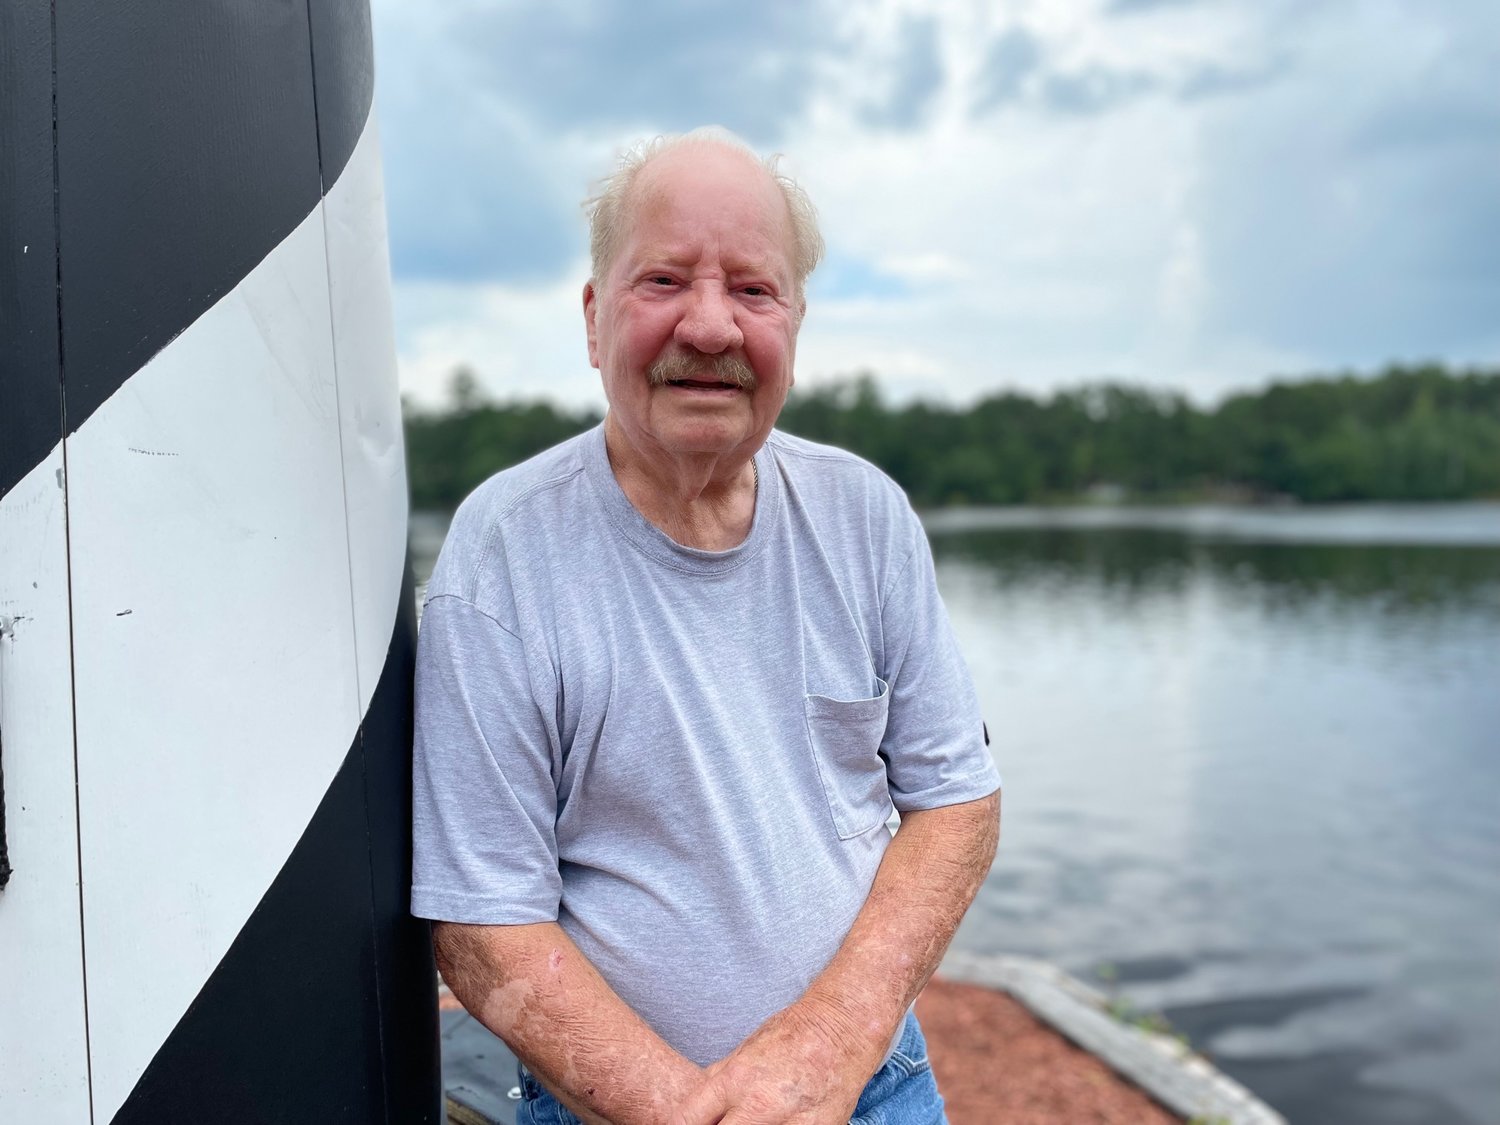 Elbert “Rex’’ Lucas restored a lighthouse in honor of his friend Billie Hooks, who he says was crazy about lighthouses. A lighthouse that Hooks bought was damaged by Hurricane Matthew in 2016. Lucas, with the help of his family and neighbors, restored the structure in memory of his friend, who died about two years ago.